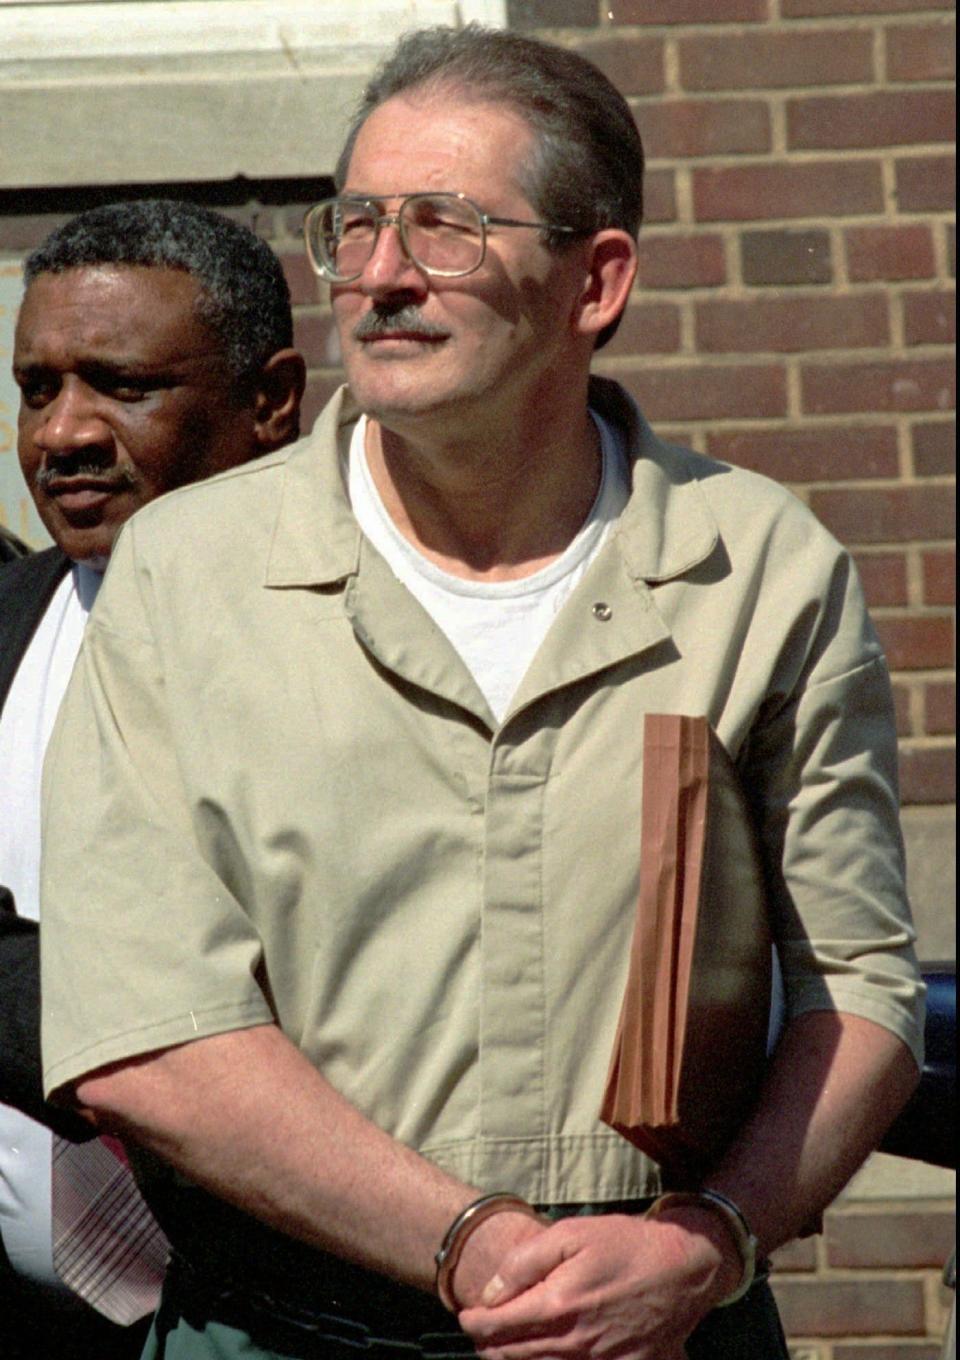 Former CIA agent Aldrich Ames leaves federal court in Alexandria, Va., on April 28, 1994 after pleading guilty to espionage and tax evasion conspiracy charges. Ames, the highest ranking CIA employee ever caught spying, was sentenced to life in prison.